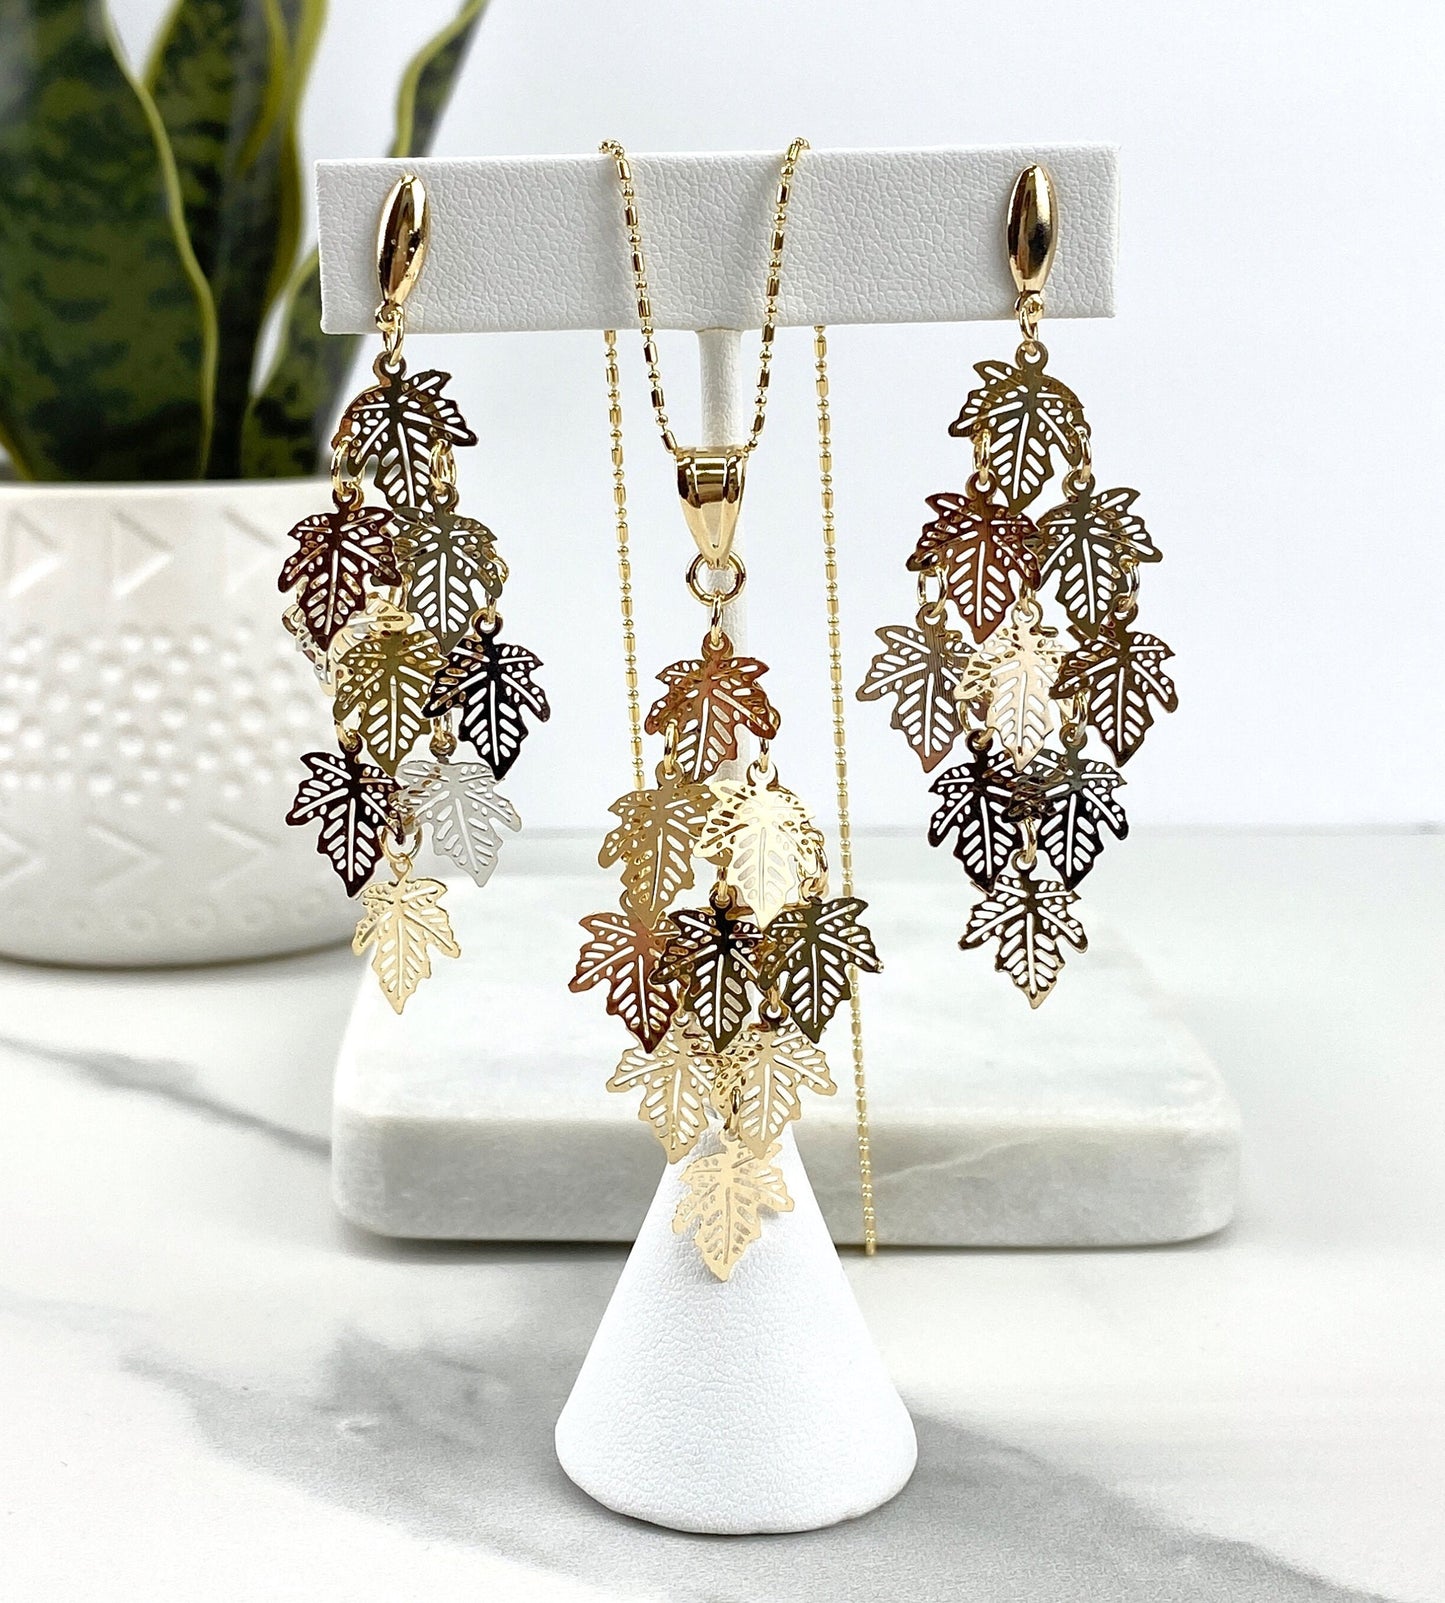 18k Gold Filled Three Tones or Gold Color Leaf Earrings & Pendants Set Wholesale Jewelry Making Supplies